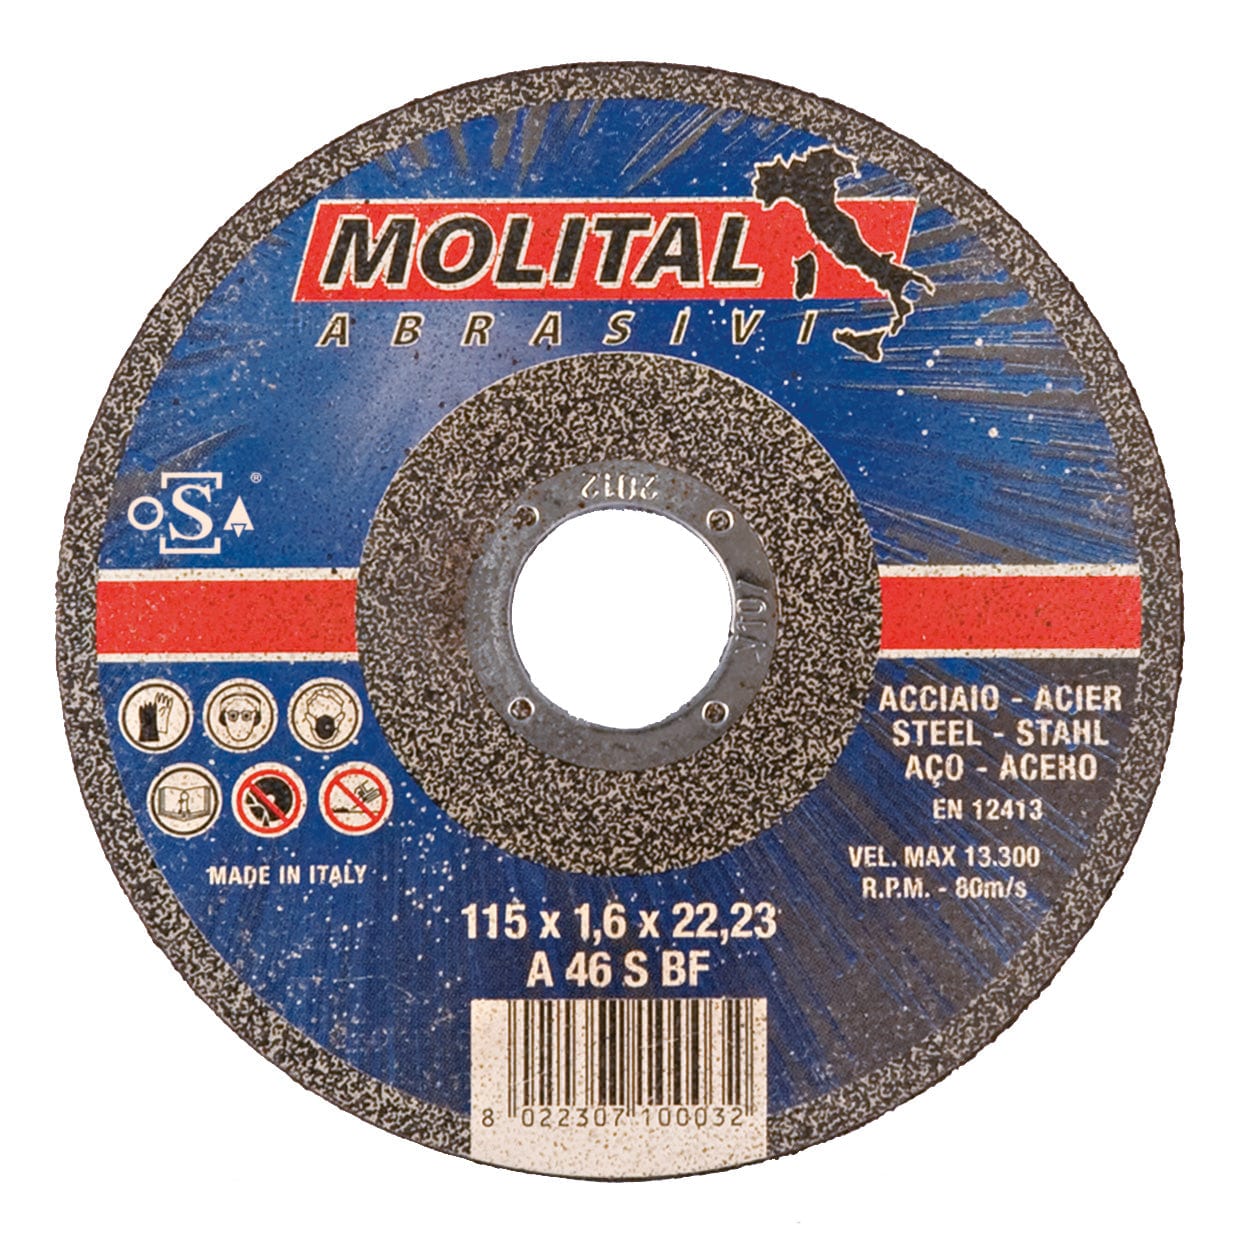 Molital Abrasive Metal Grinding Disc | Supply Master, Accra, Ghana Grinding & Cutting Wheels Buy Tools hardware Building materials